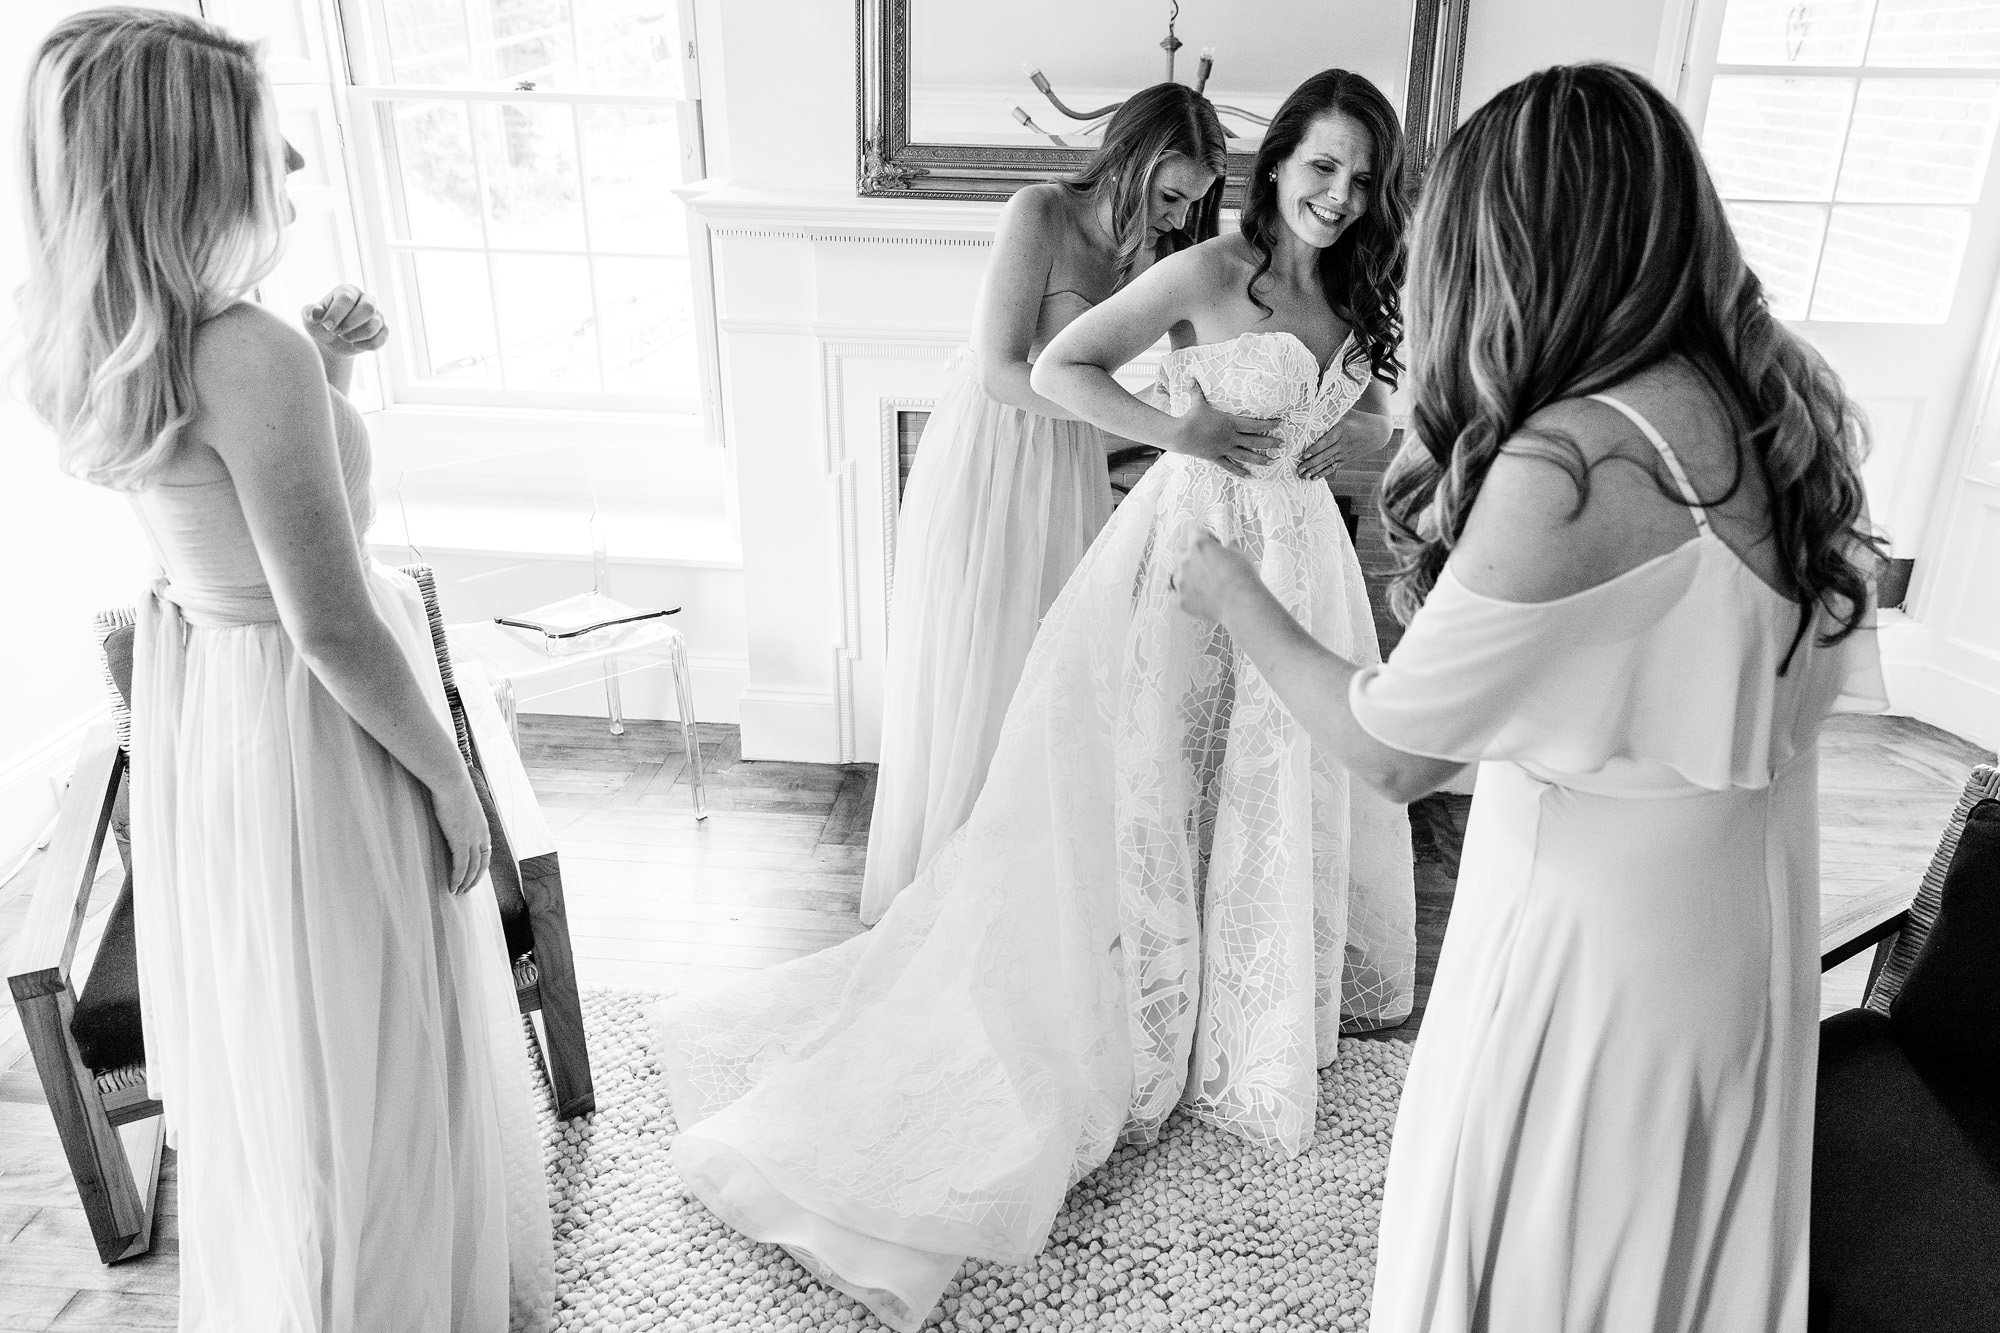 The bride gets ready for her wedding with her bridesmaids at the Blind Tiger in Portland Maine